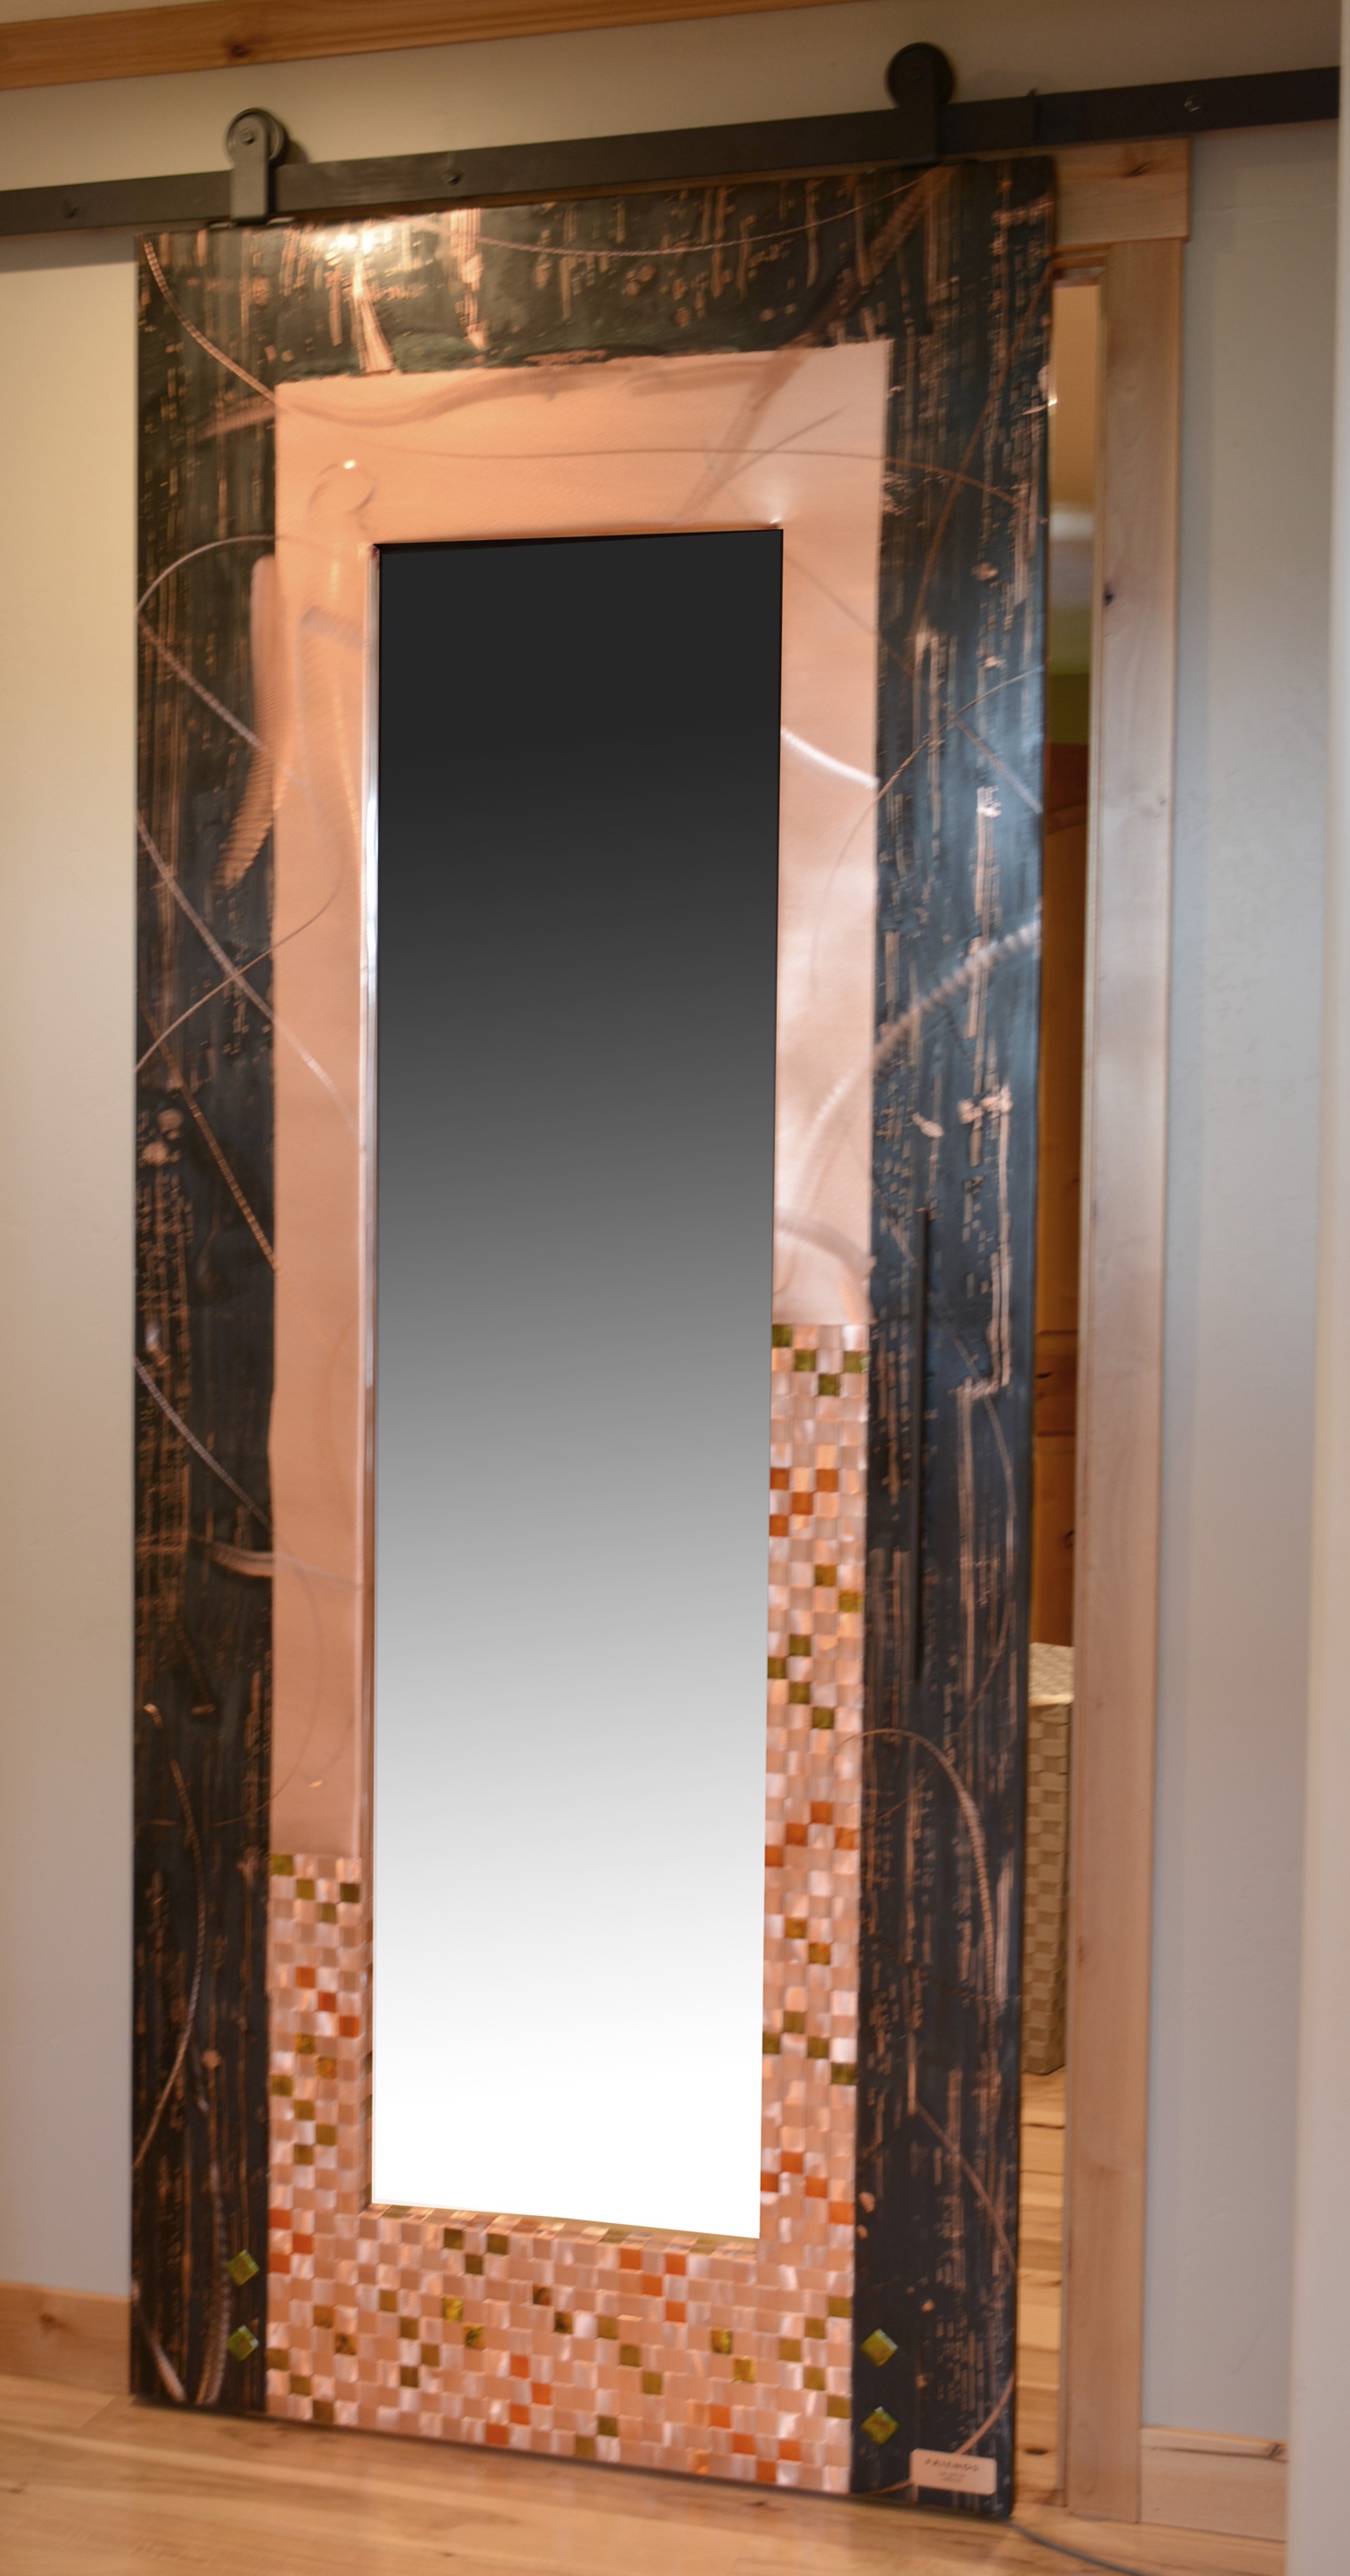 Copper or Steel Barn Door ~ Available for commissions in custom sizes and designs. by Jean And Tom Heffernan